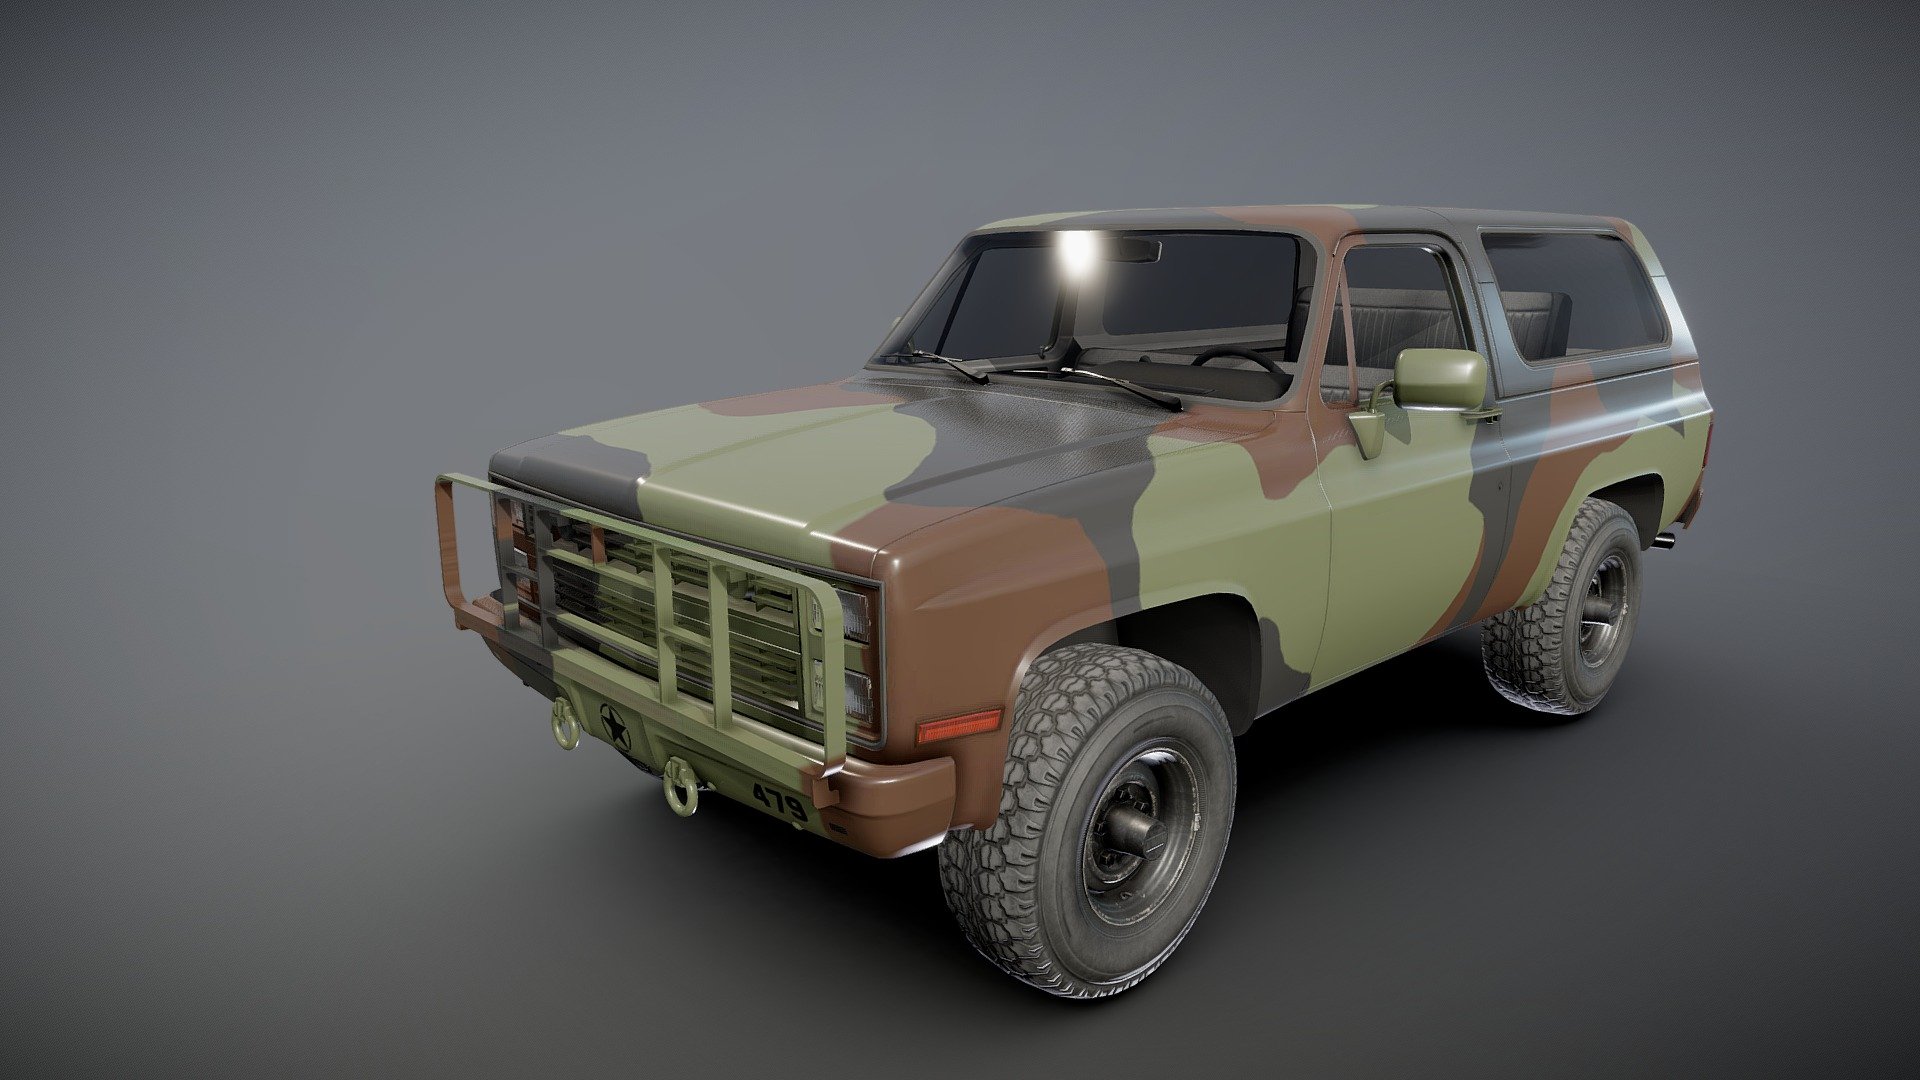 USA military offroad vehiclecar model.

Midpoly exterior.

Lowpoly interior(1024x1024 diffuse texture).

Low poly wheels with PBR textures(2048x2048).

Full model - 47882 tris 27572 verts

Lowpoly interior -3485 tris 2062 verts

Wheels - 11668 tris 6344 verts

Original scale

Length - 4,3m, widht - 1,8m, hieght - 1,72m

Model ready for real-time apps, games, virtual reality and augmented reality.

Asset looks accuracy and realistic and become a good part of your project 3d model